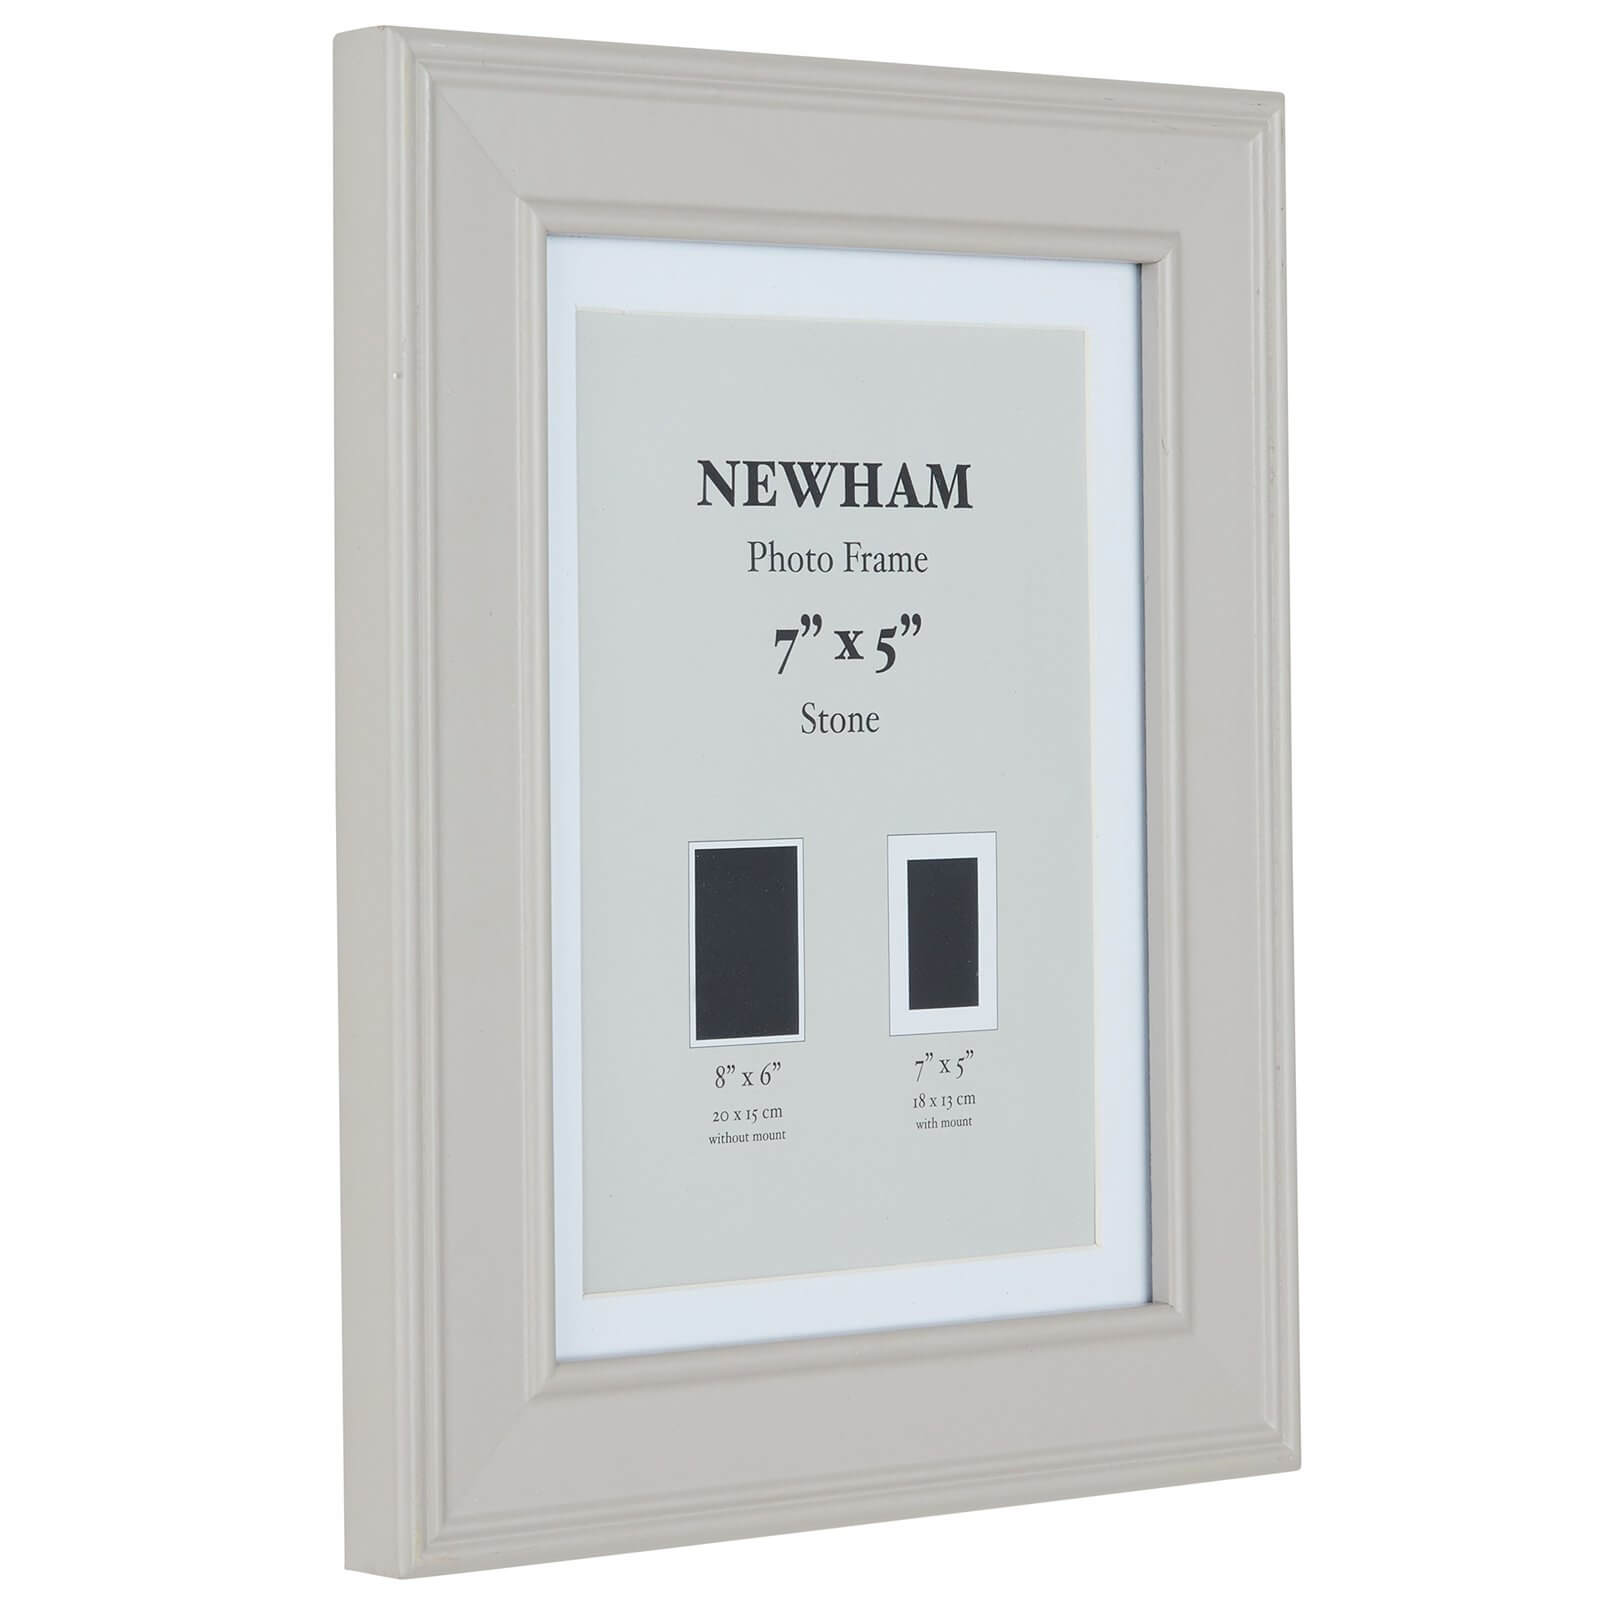 Newham Picture Frame 7 x 5 - Stone